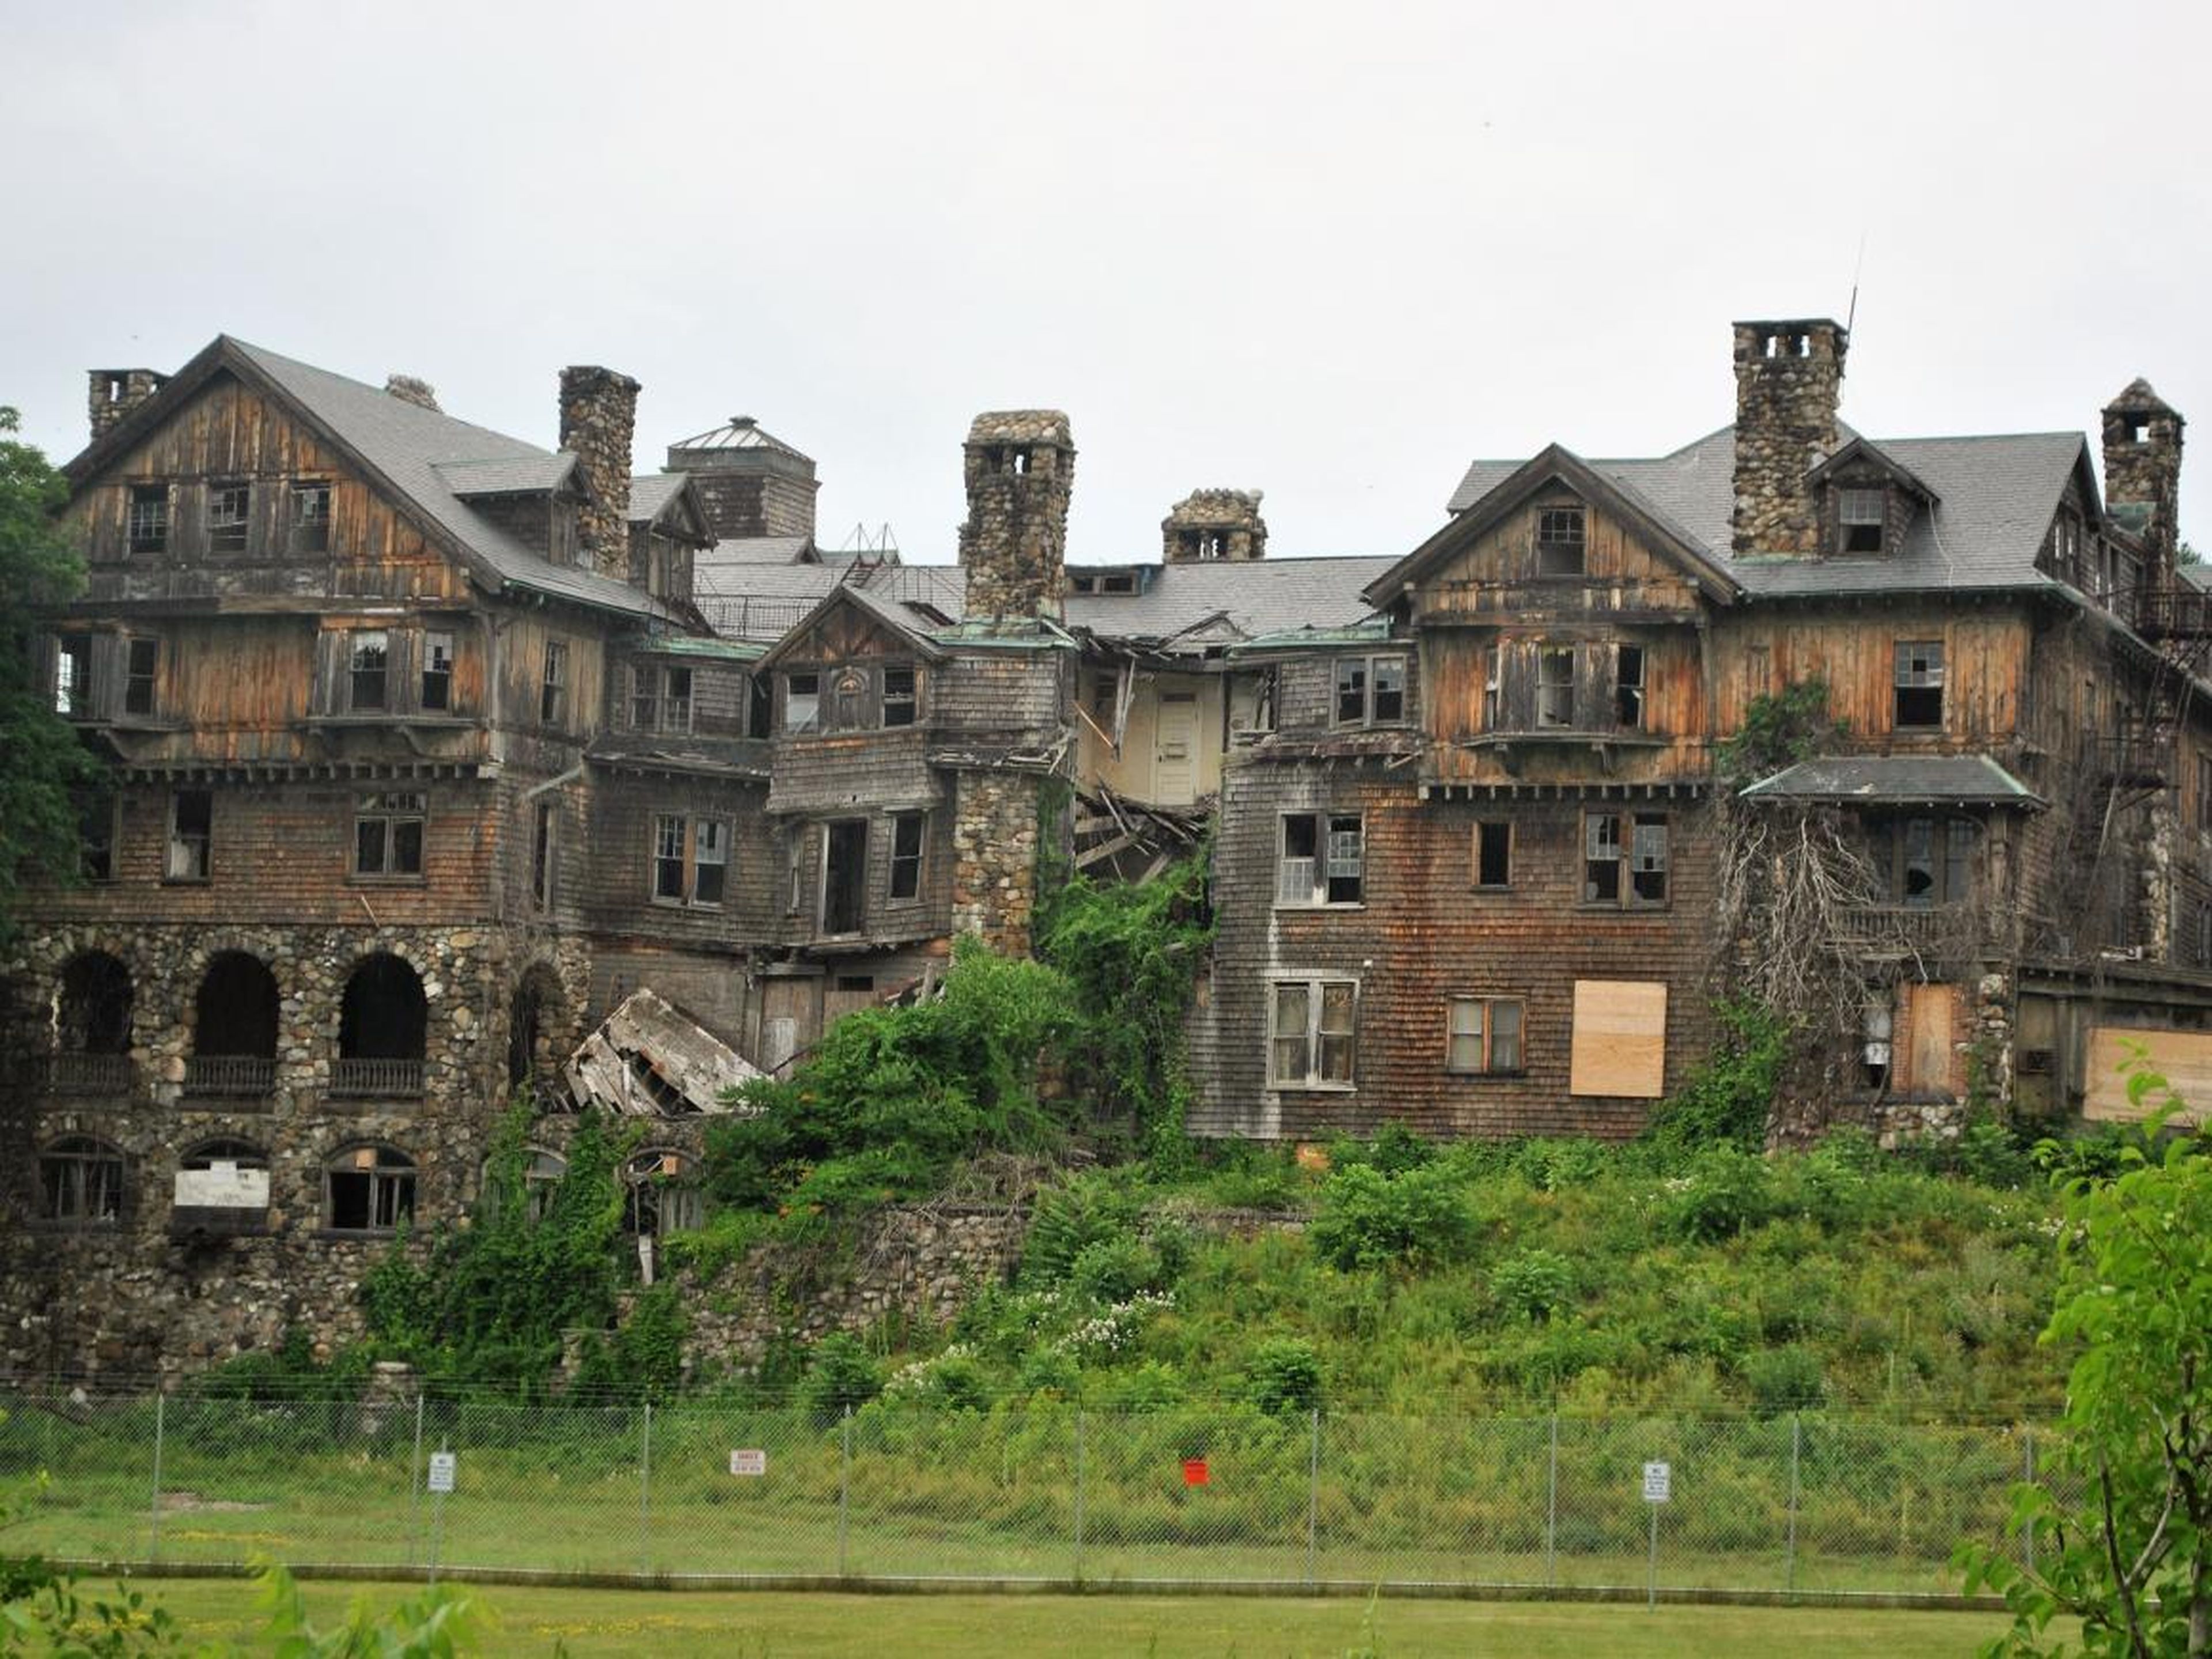 The now-decrepit mansion was purchased in 2014 with plans to demolish it and replace it with a park.